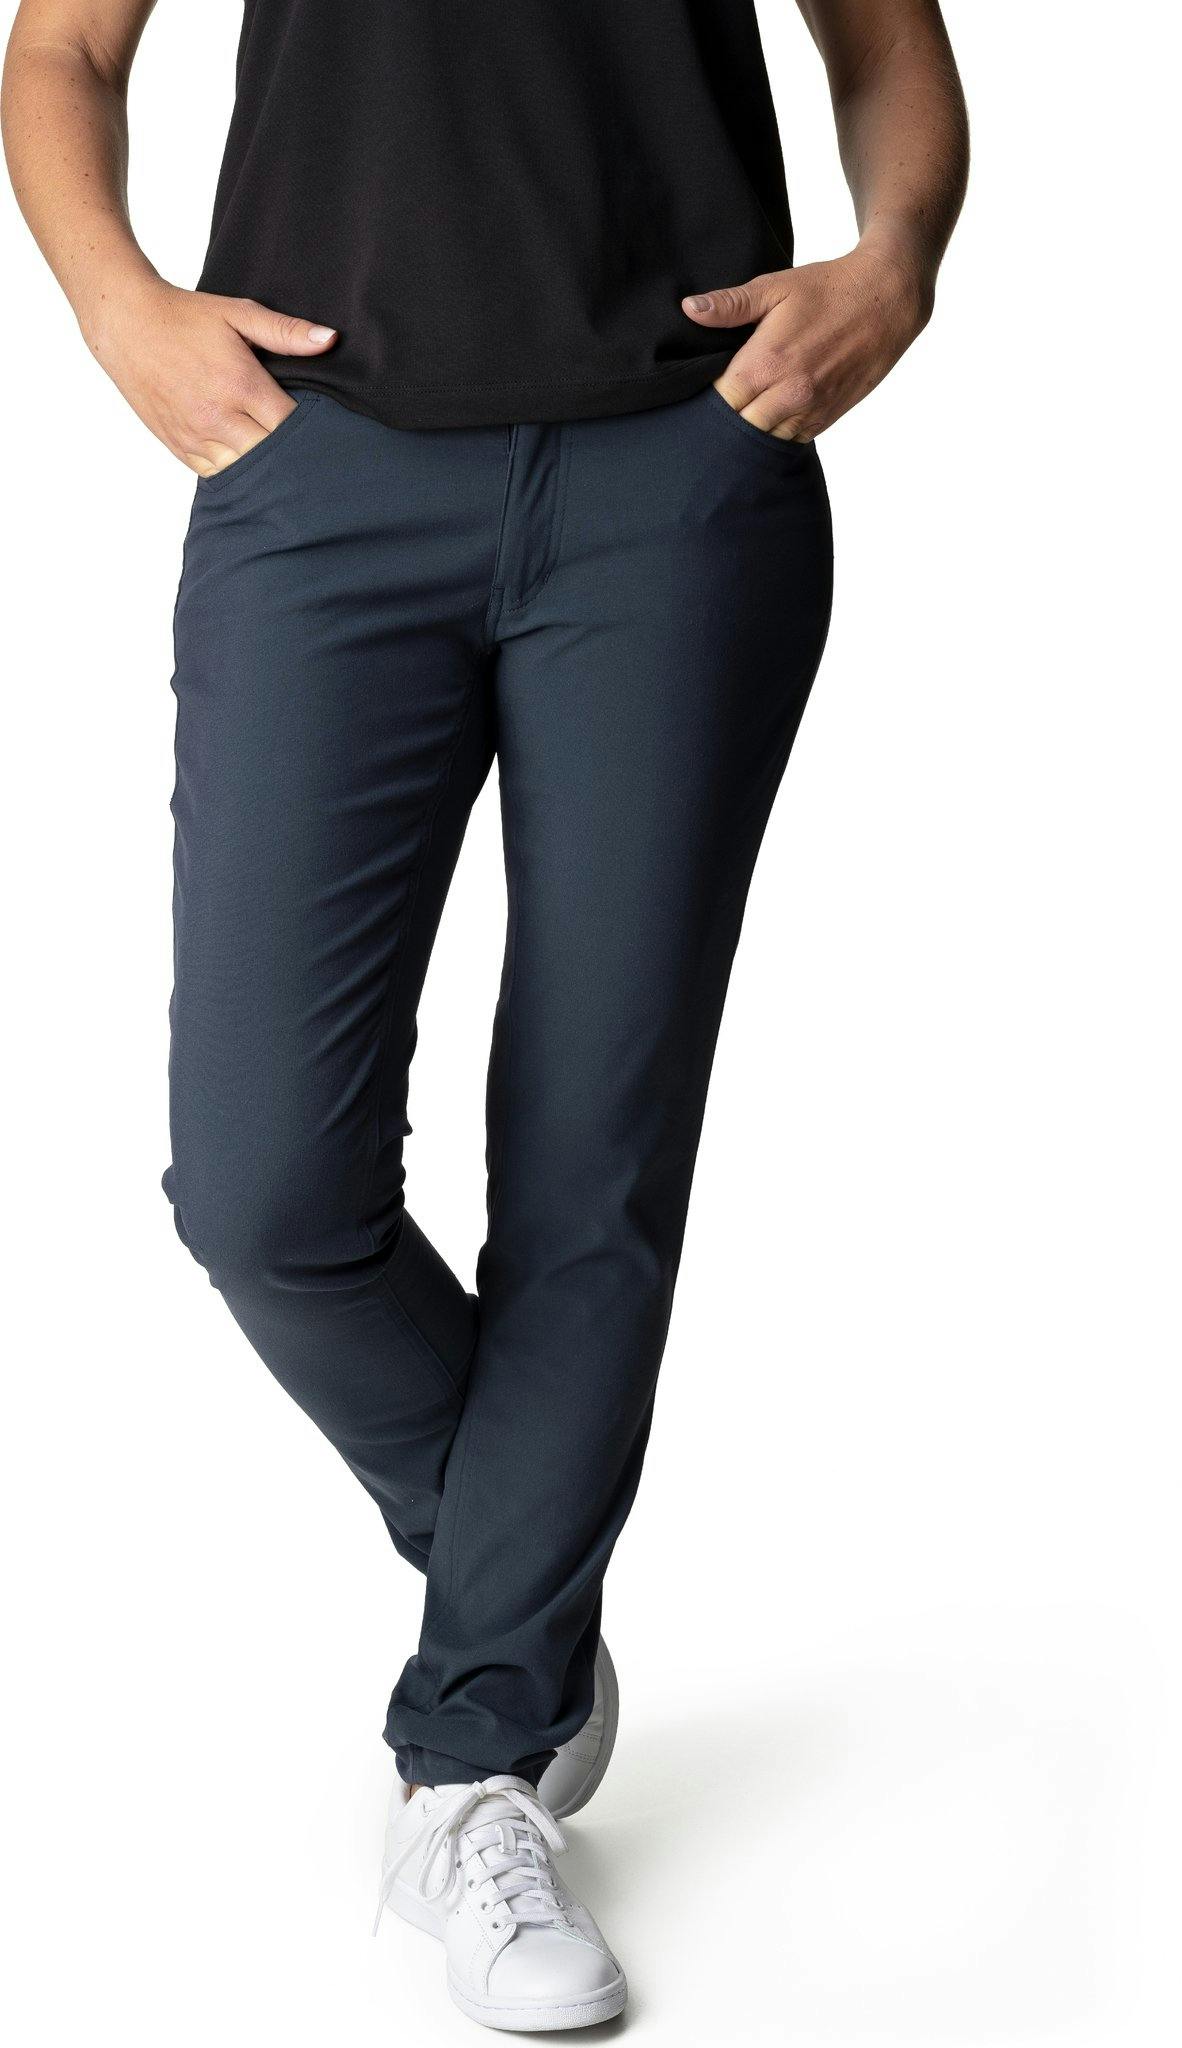 Product image for Way To Go Pants - Women's